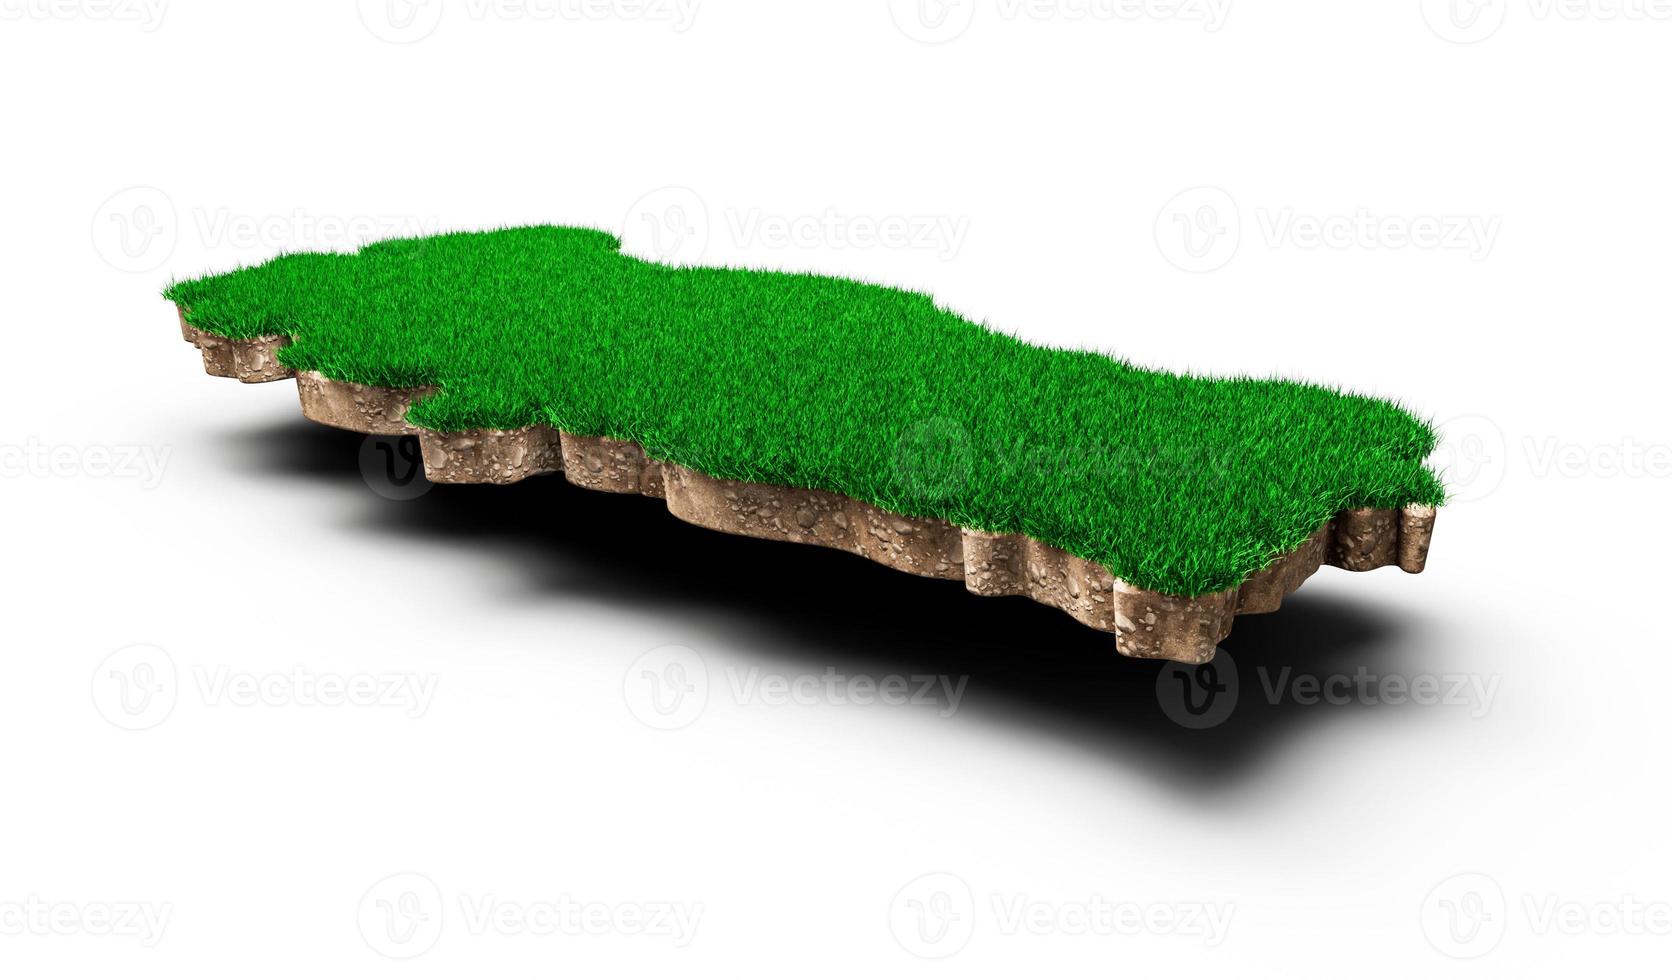 Turkey Map soil land geology cross section with green grass and Rock ground texture 3d illustration photo